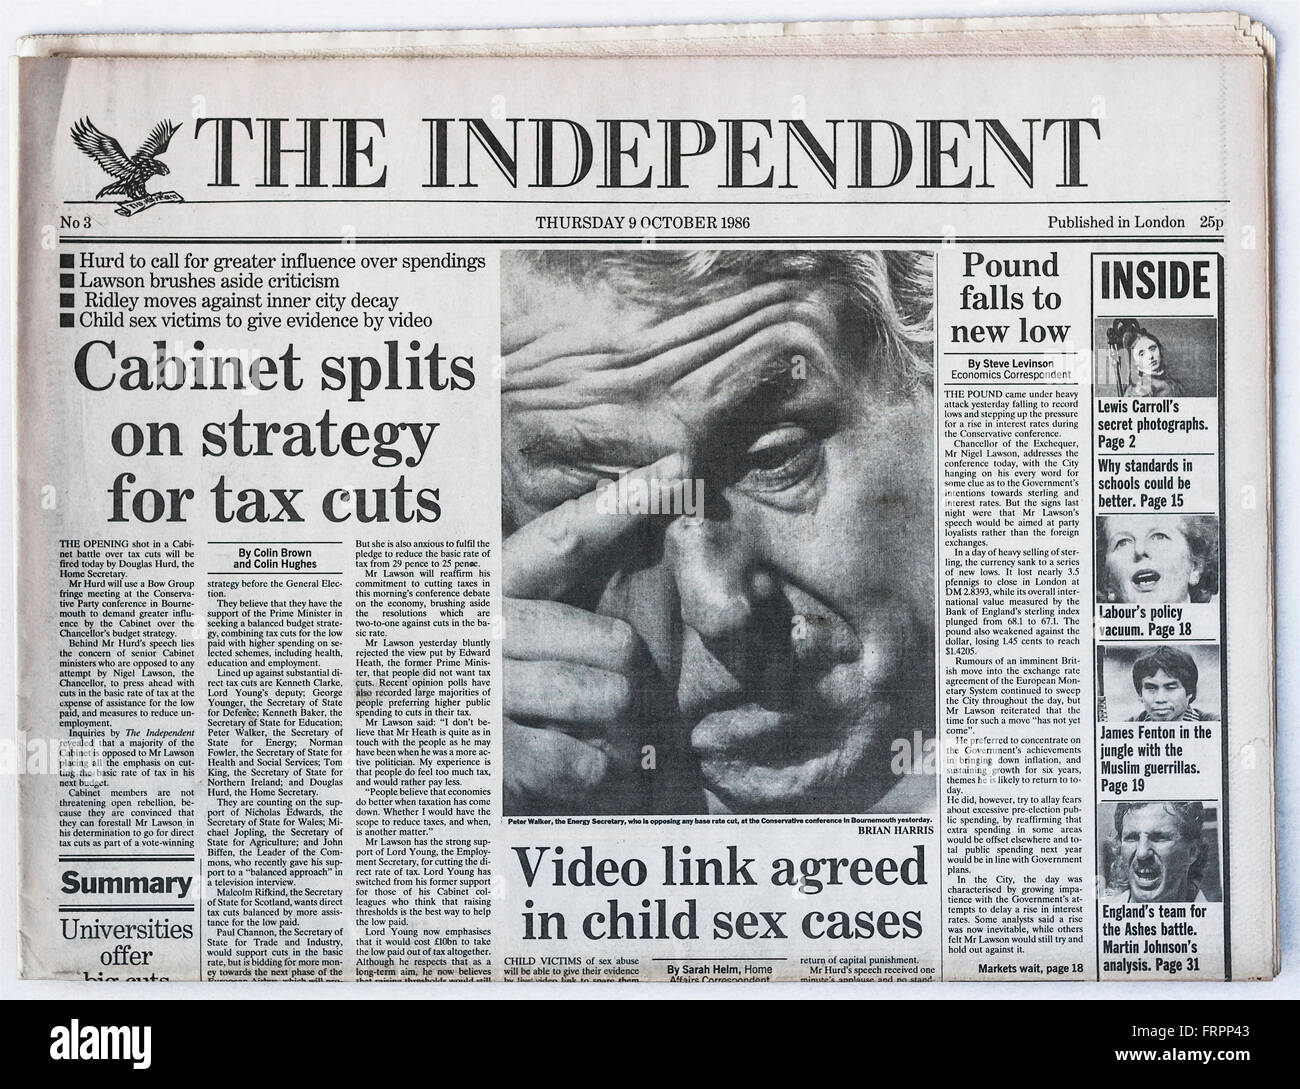 Upper front page Issue #3 'The Independent' UK national newspaper printed Thursday 9th October 1986 - 'The Independent' is ceasing in print form on Saturday 26th March 2016 after close to 30 years publication.   Credit:  Ed Buziak/Alamy Live News Stock Photo